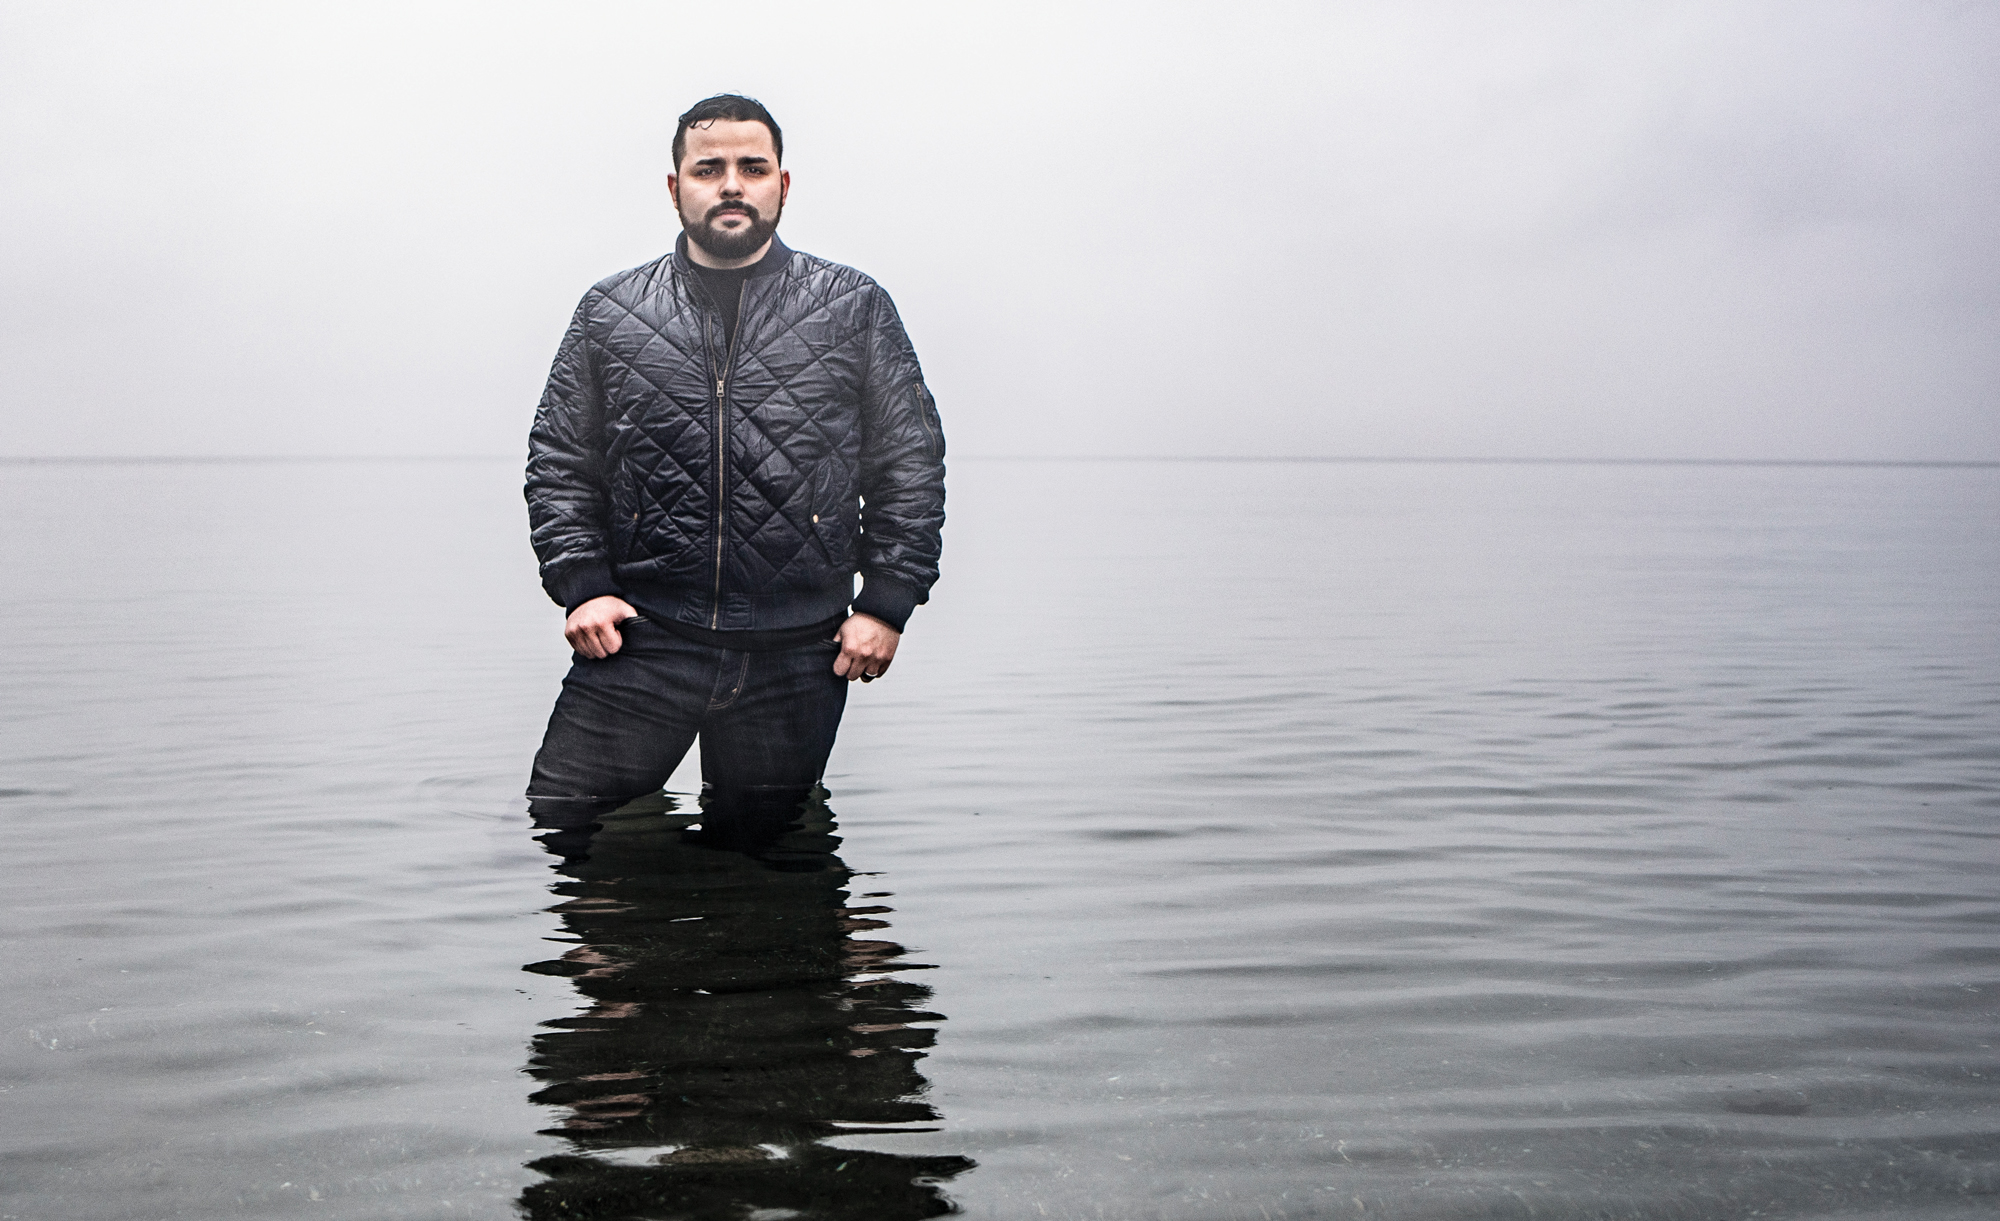 A man with a beard and puffy jacket stands thigh-deep in a body of water on a cloudy day